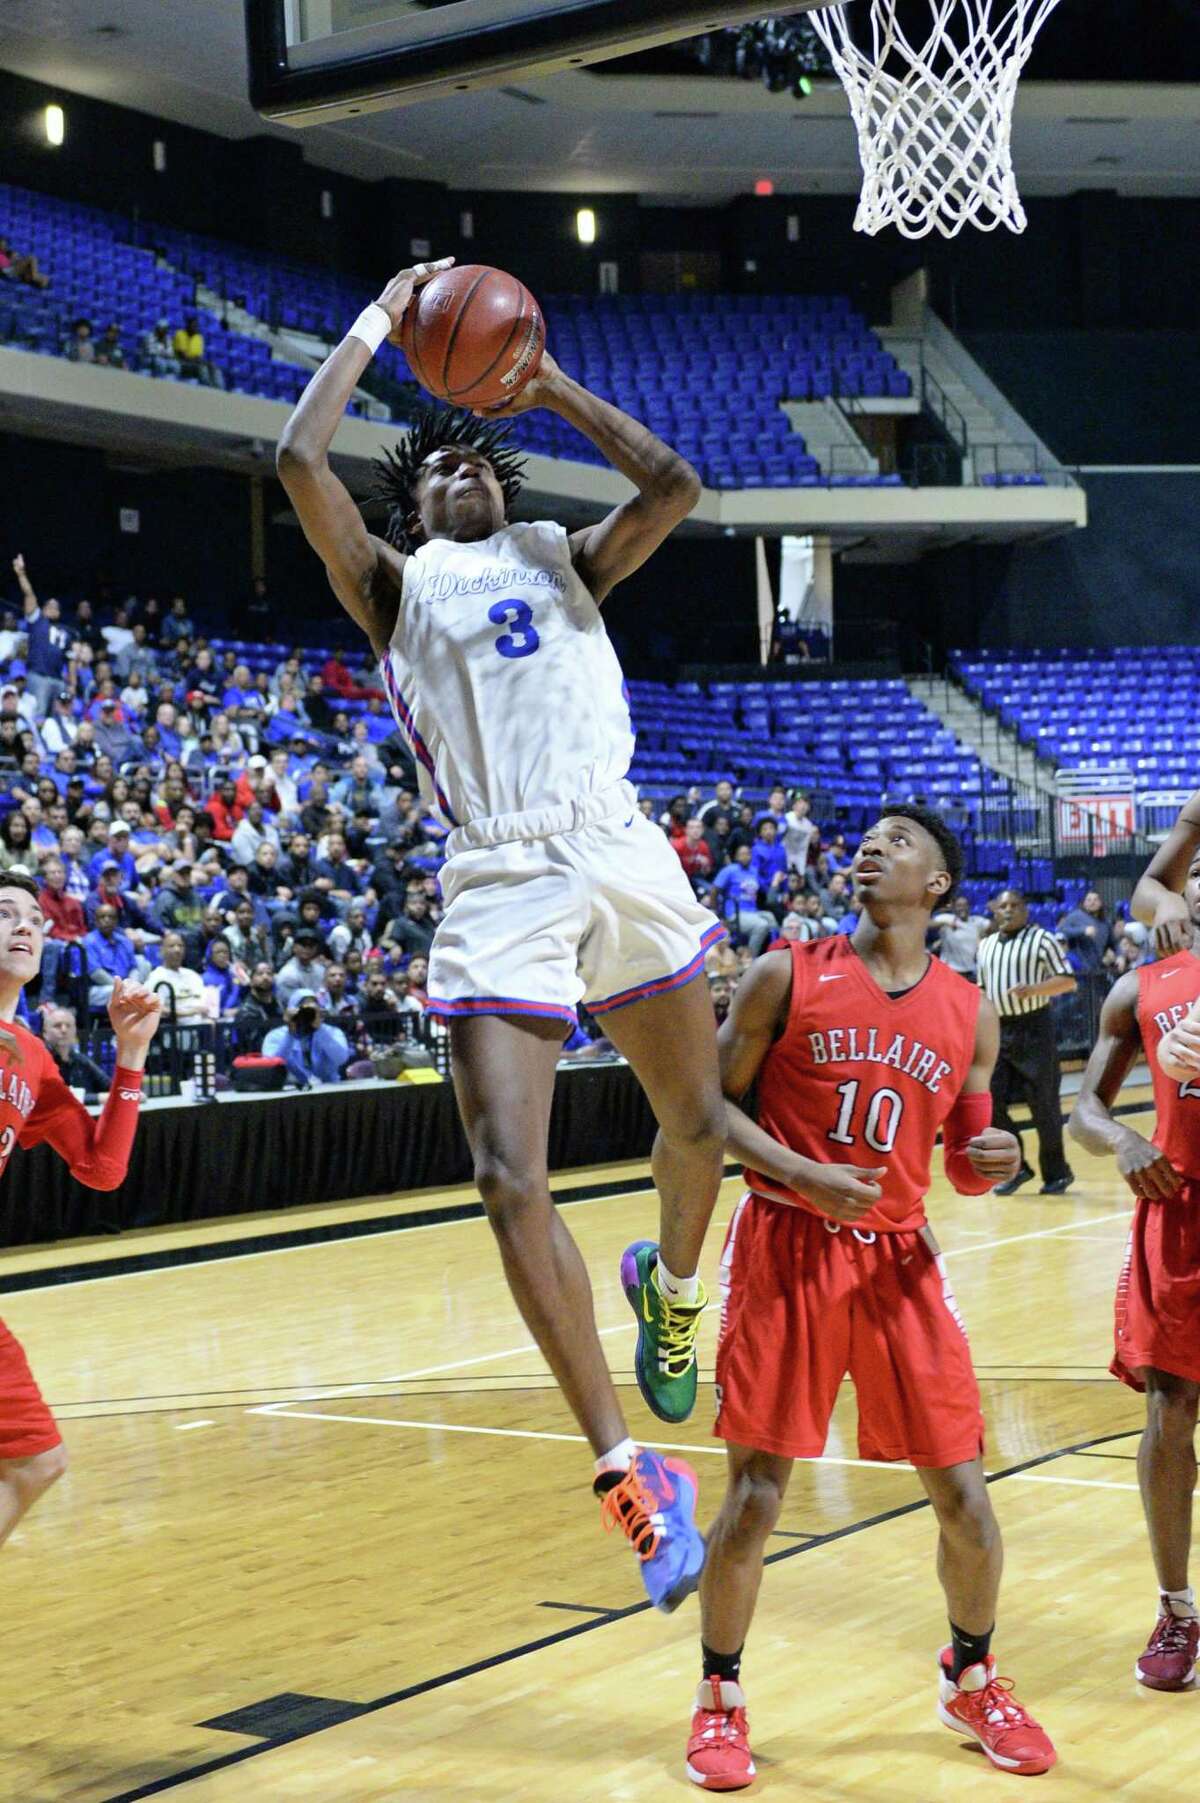 Tramon Mark (3) of Dickinson has been selected co-most valuable player of District 24-6A.